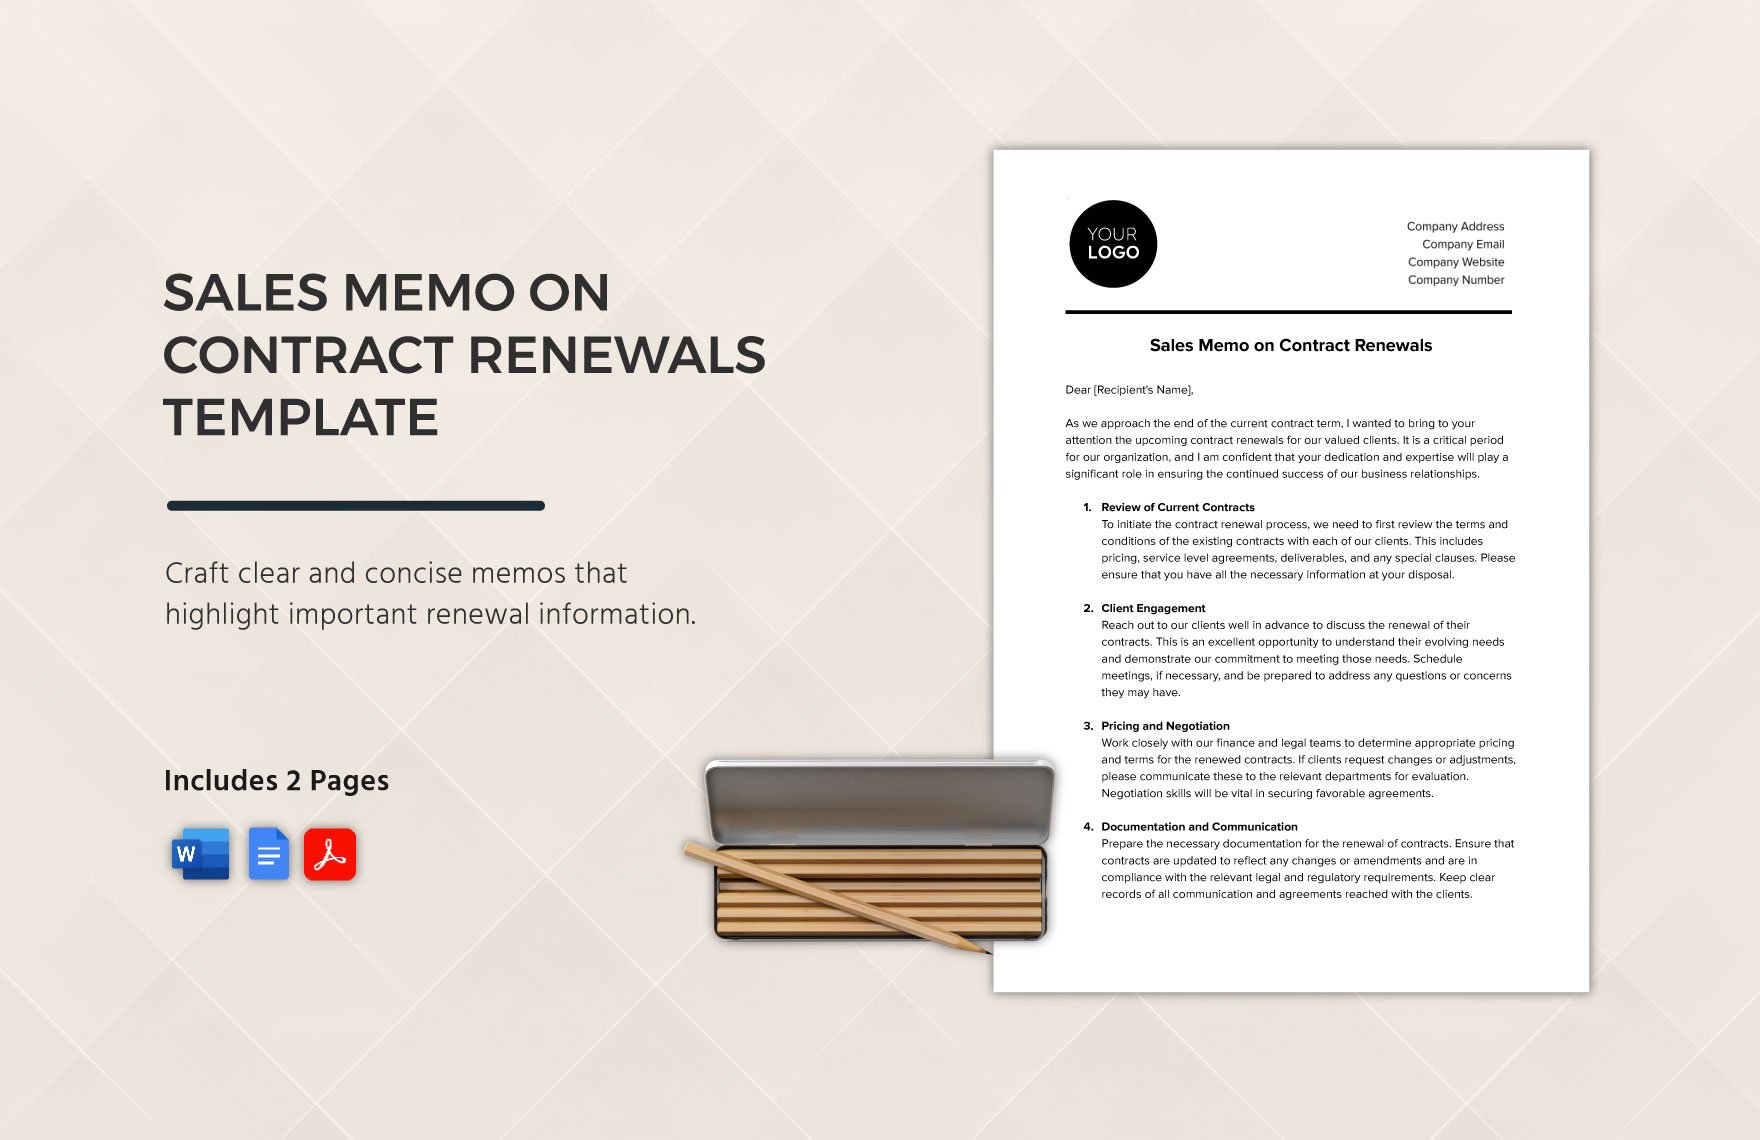 Sales Memo on Contract Renewals Template